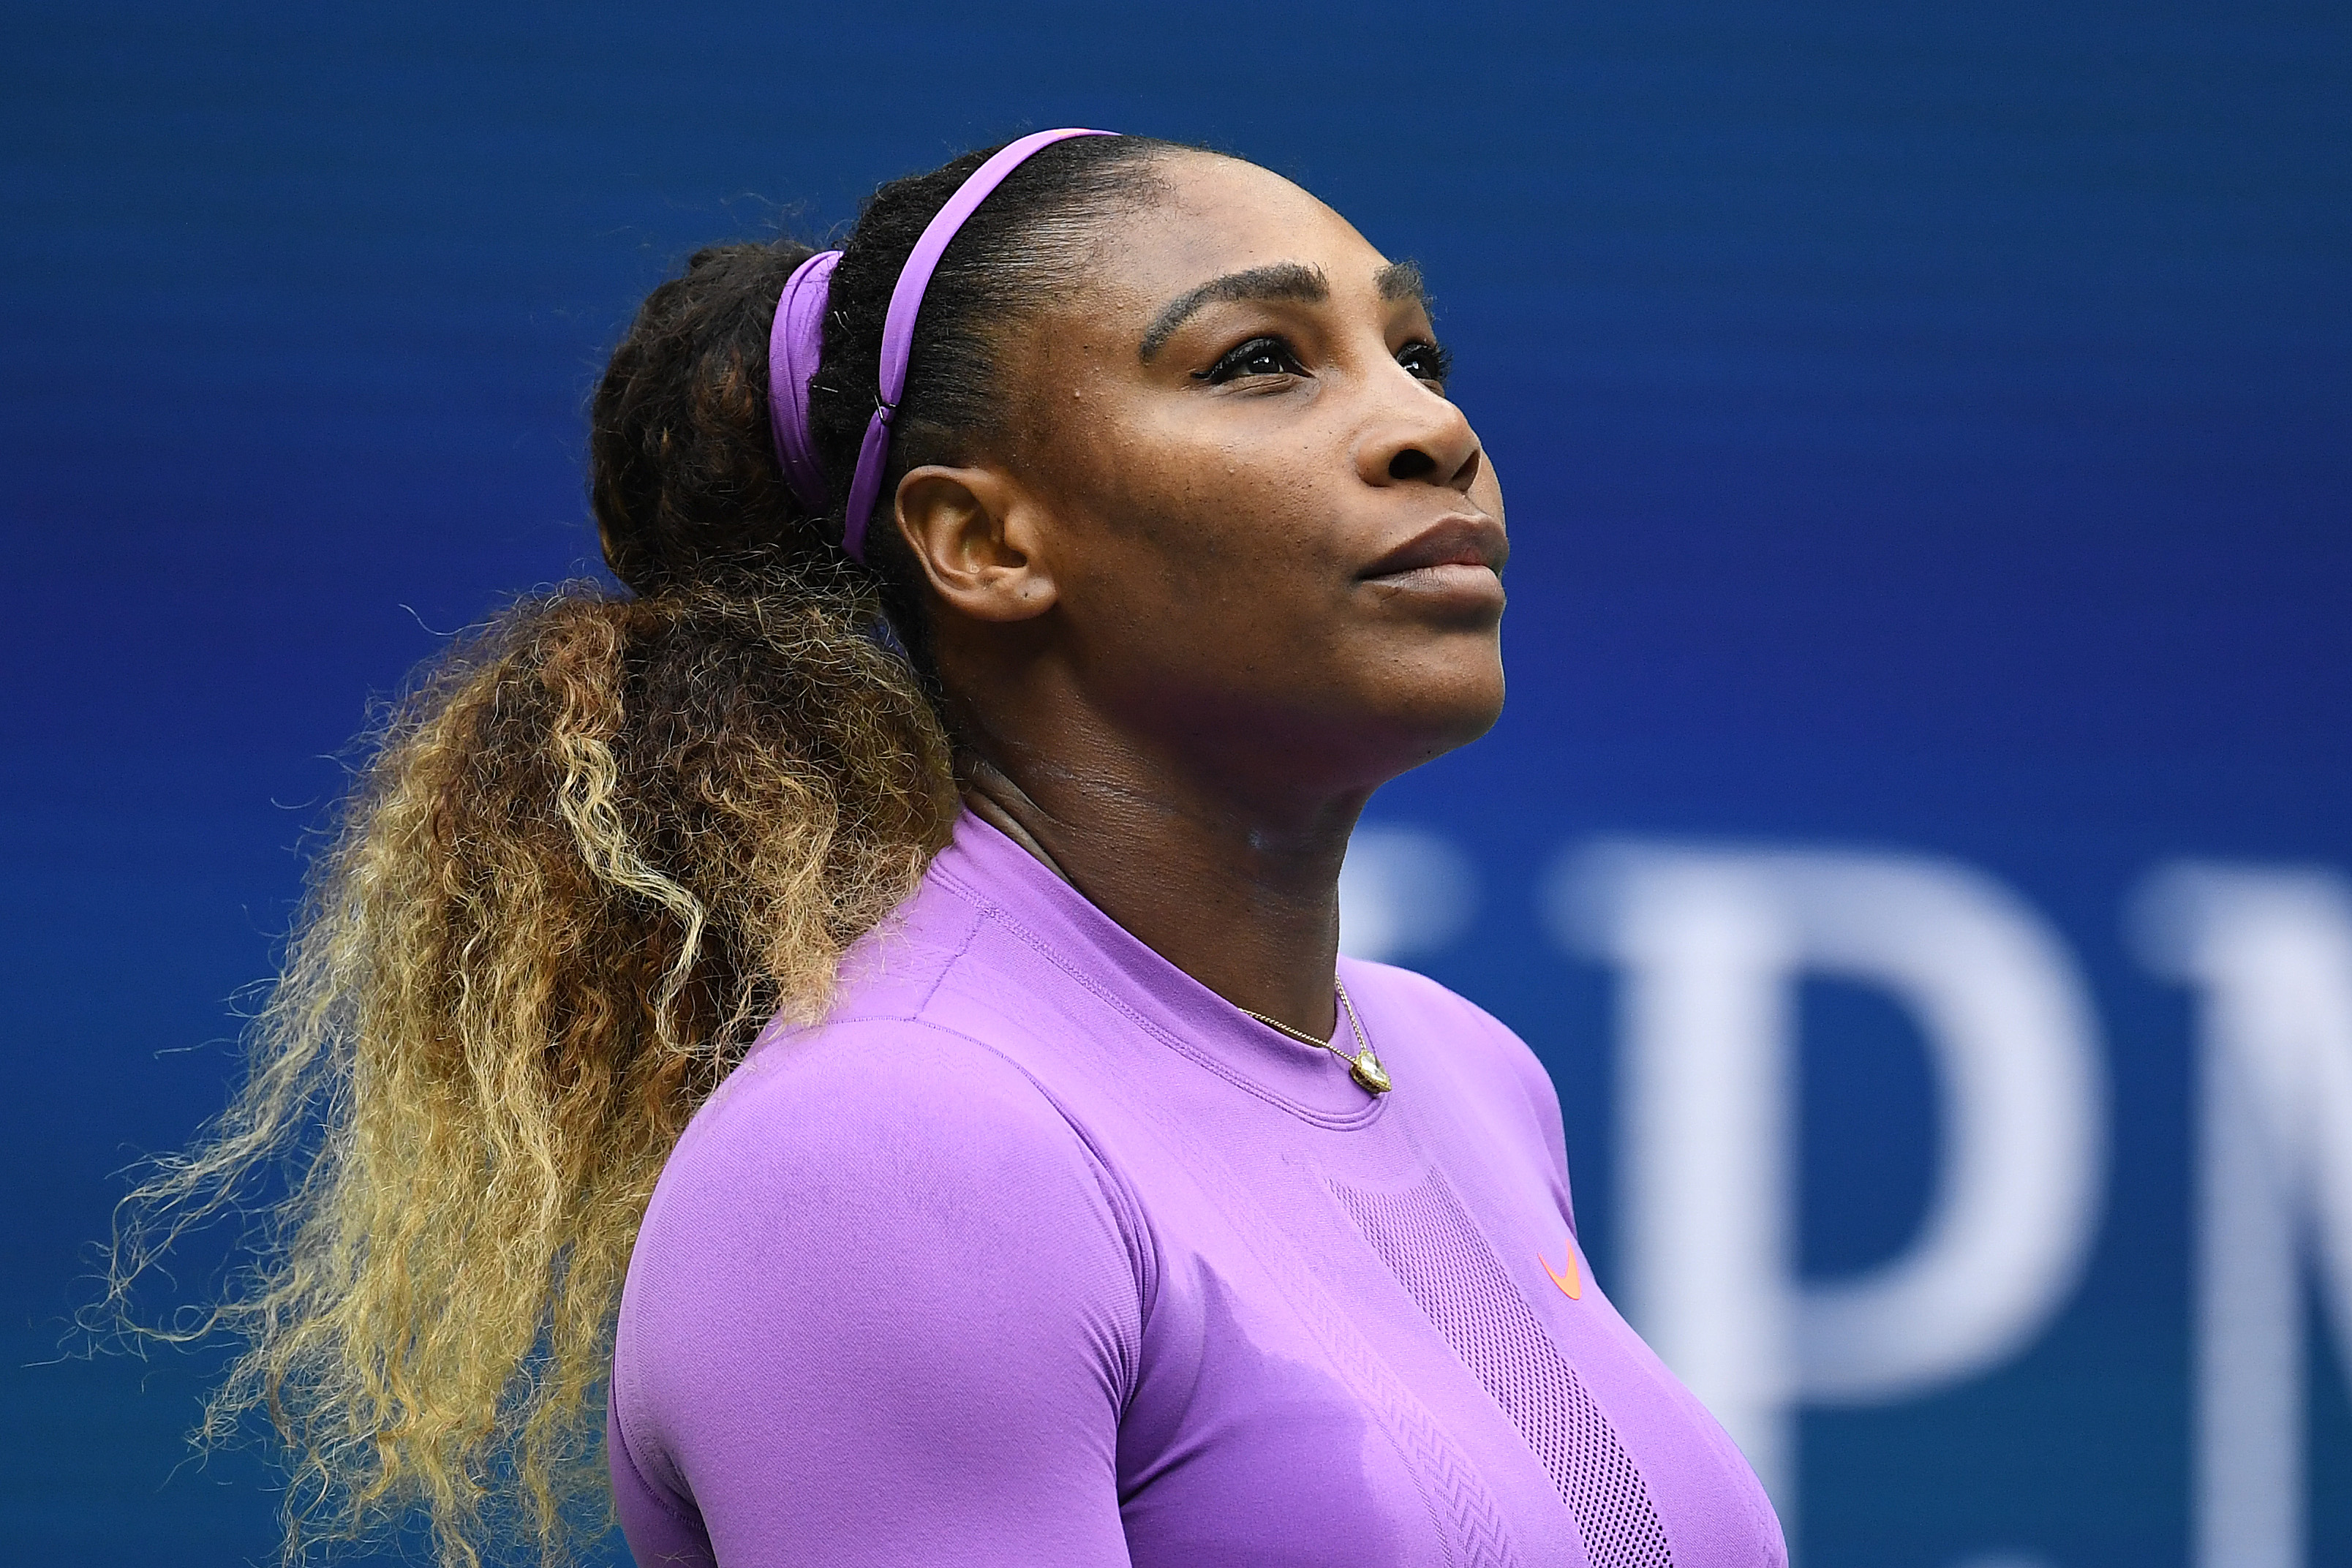 Serena Williams on September 07, 2019 in New York City | Source: Getty Images